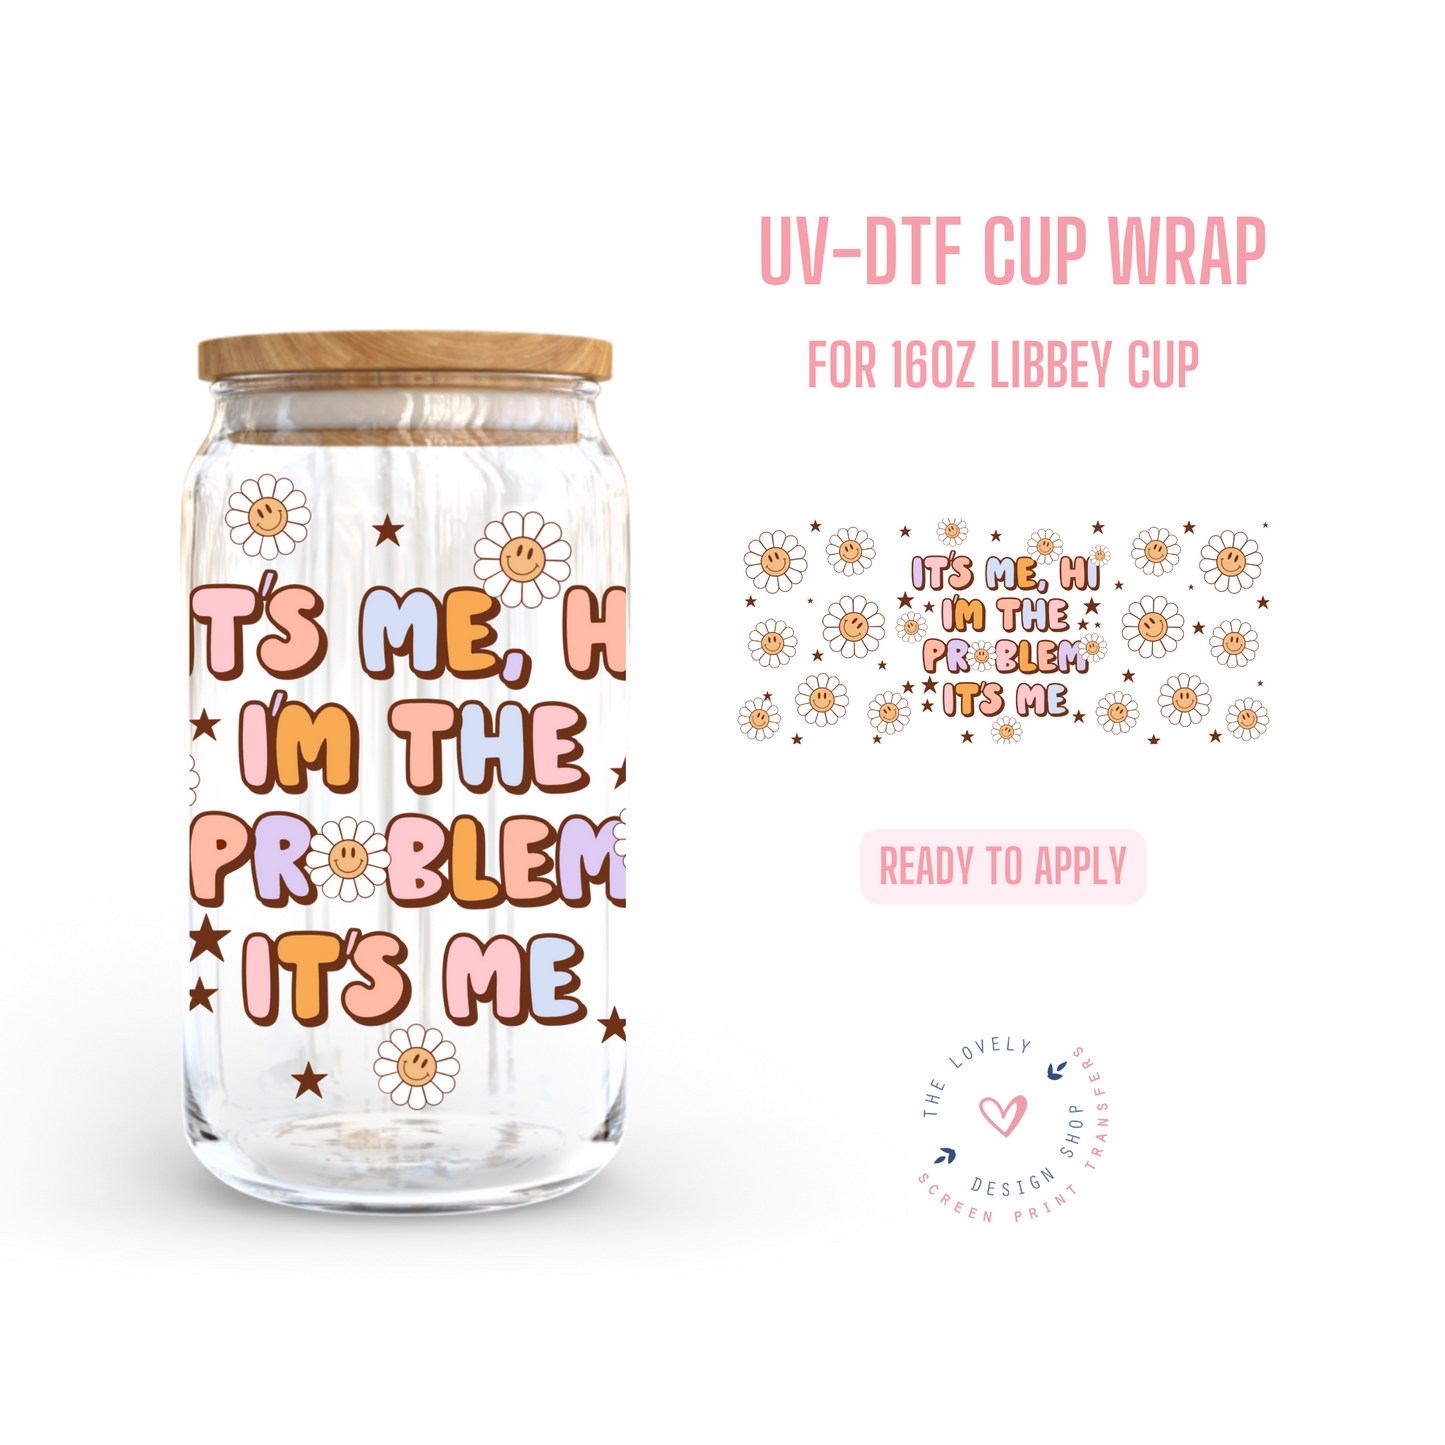 The Problem it's Me - UV DTF 16 oz Libbey Cup Wrap (Ready to Ship)